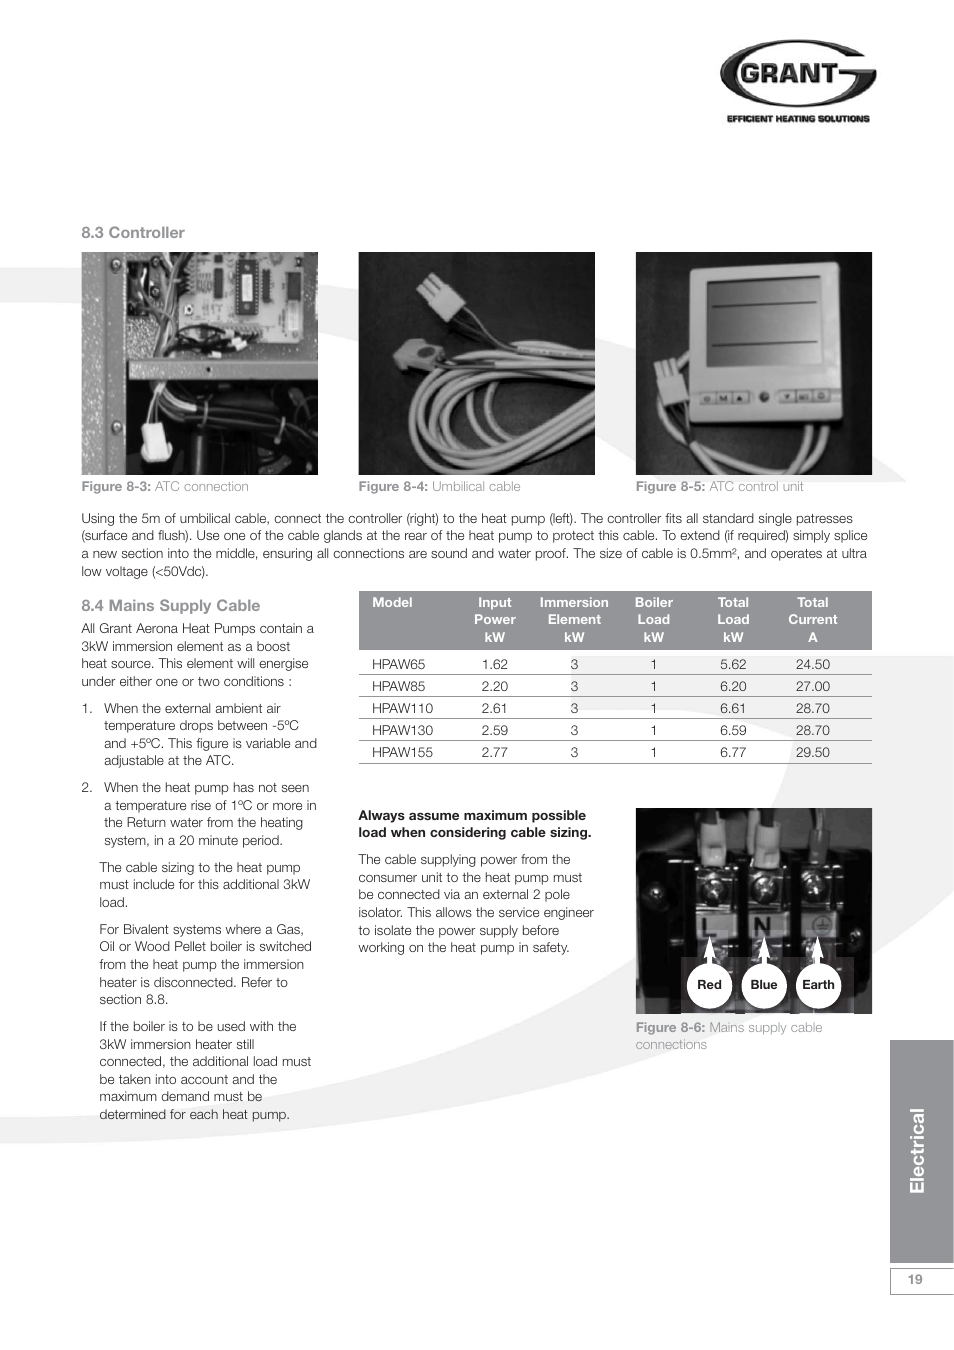 Electrical | Grant Products HPAW155 User Manual | Page 23 / 50